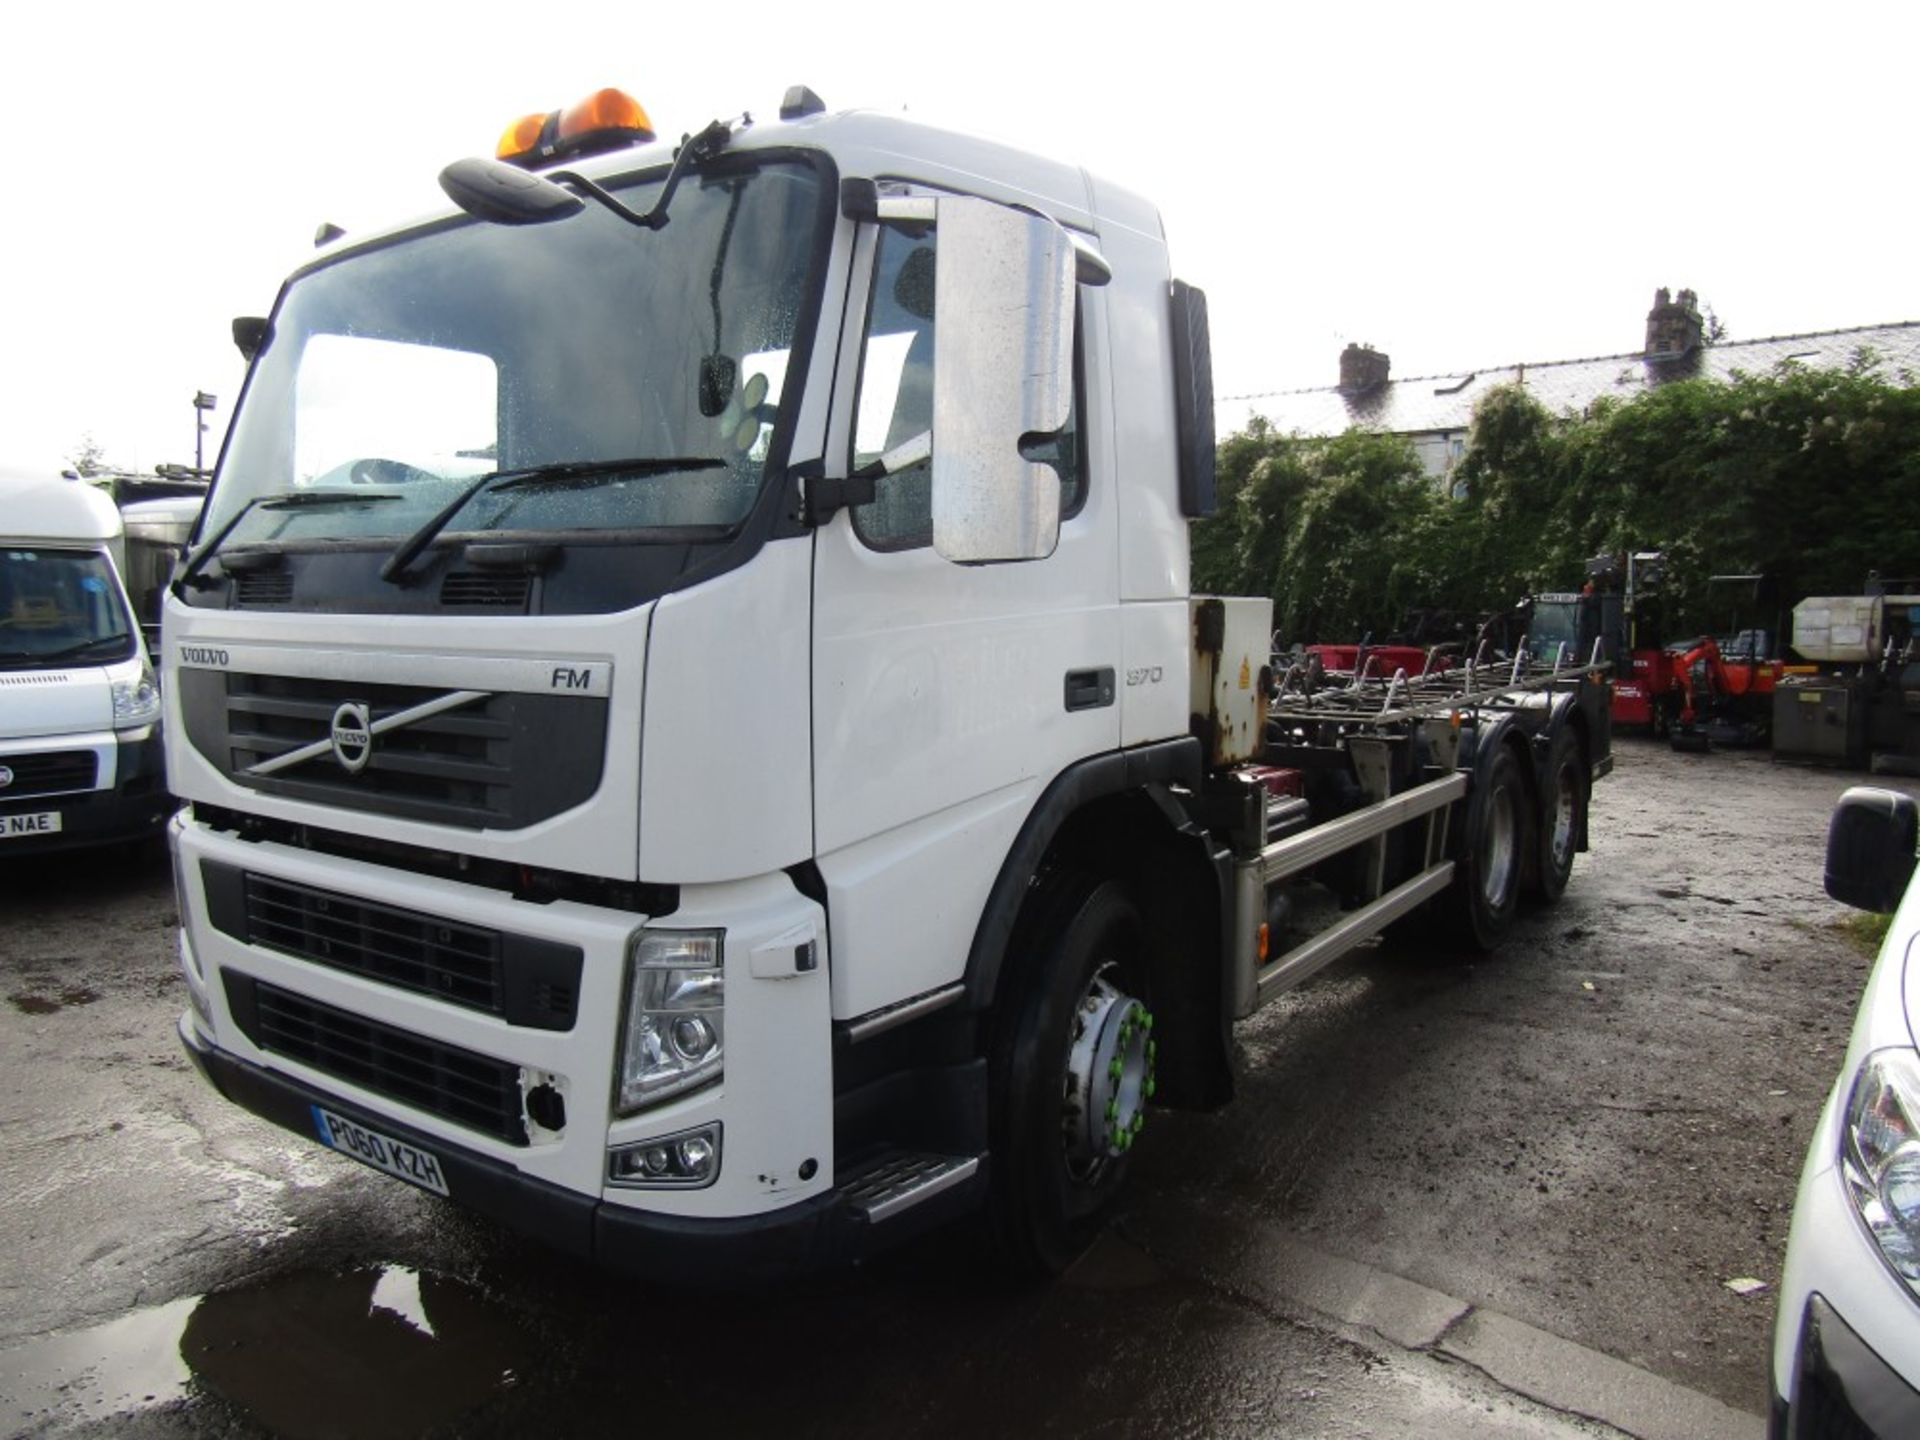 60 reg VOLVO FM370 CHASSIS CAB (DIRECT UNITED UTILITIES WATER) 1ST REG 01/11, TEST 11/22, 281457KM - Image 2 of 7